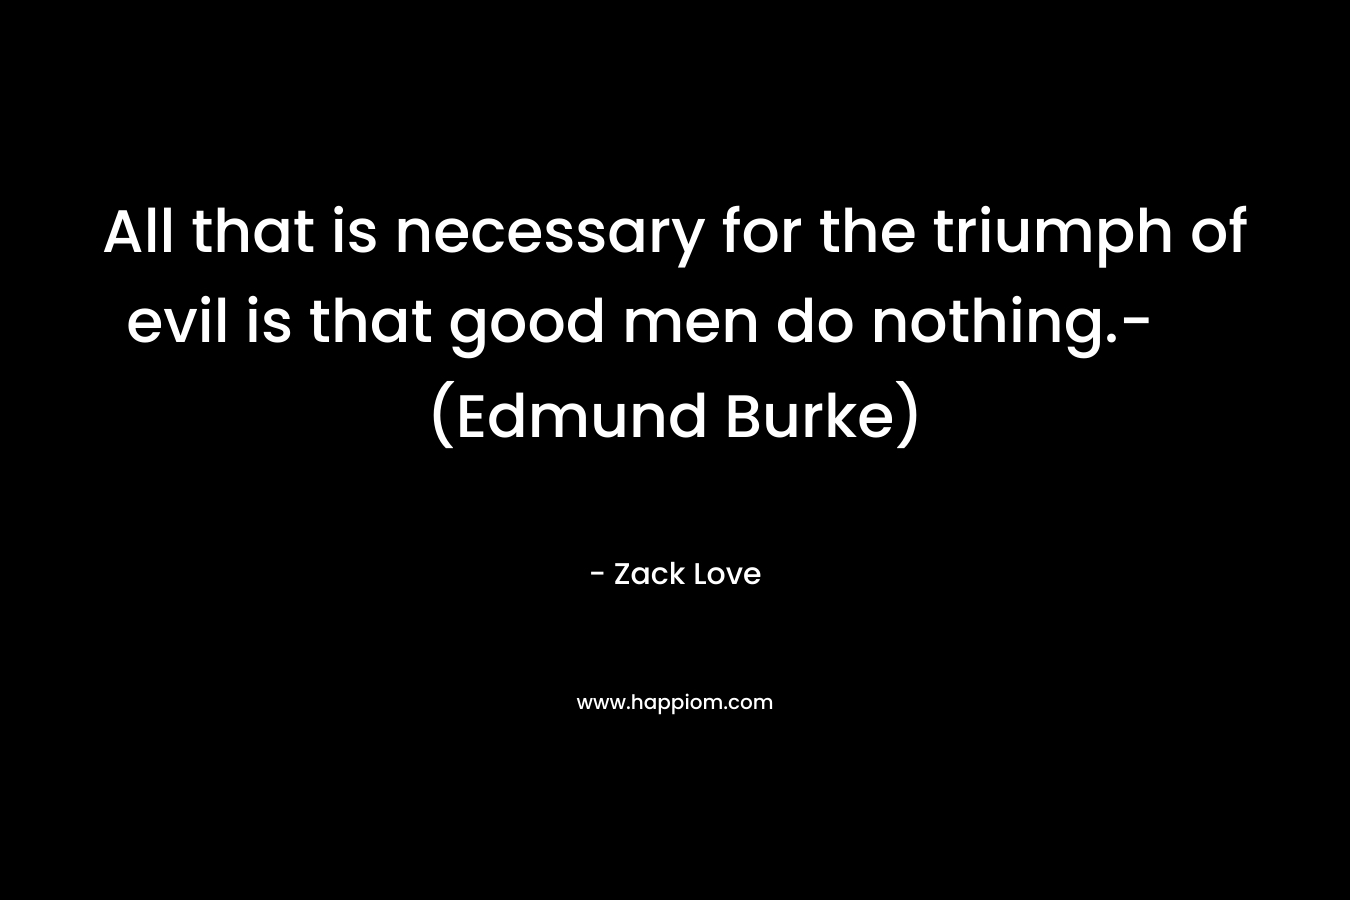 All that is necessary for the triumph of evil is that good men do nothing.- (Edmund Burke)